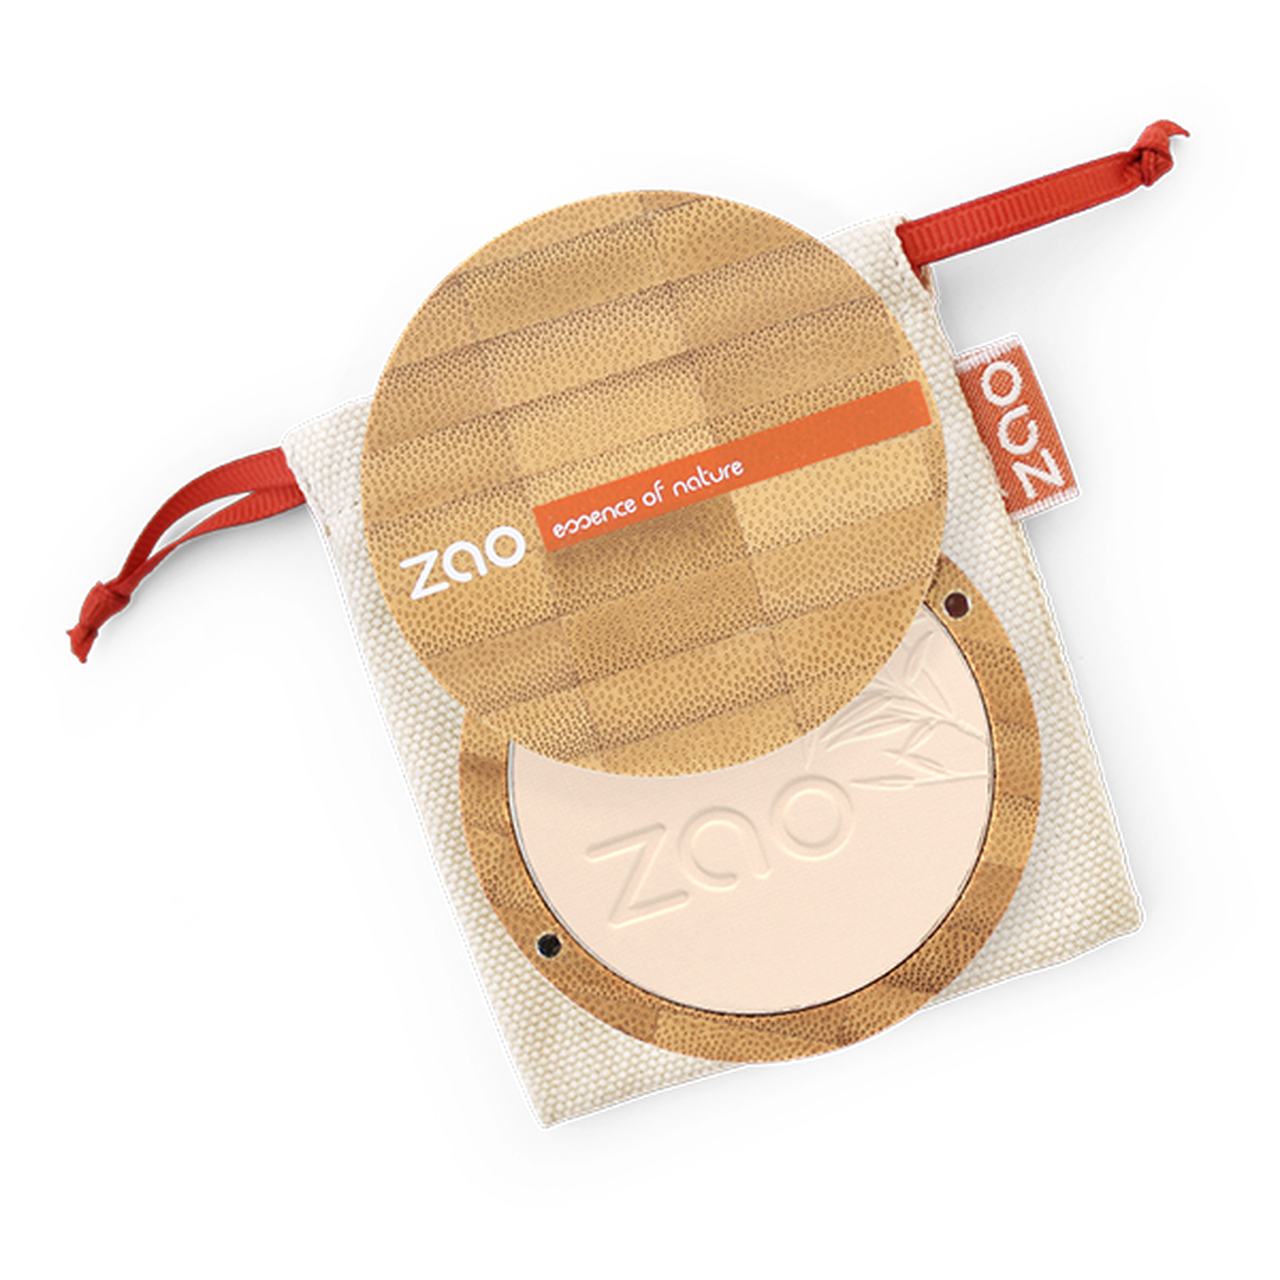 Zao's mattifying powder compact helps you prevent shine by setting and balancing the complexion for a smooth and silky finish | Plastic Free | Low Waste